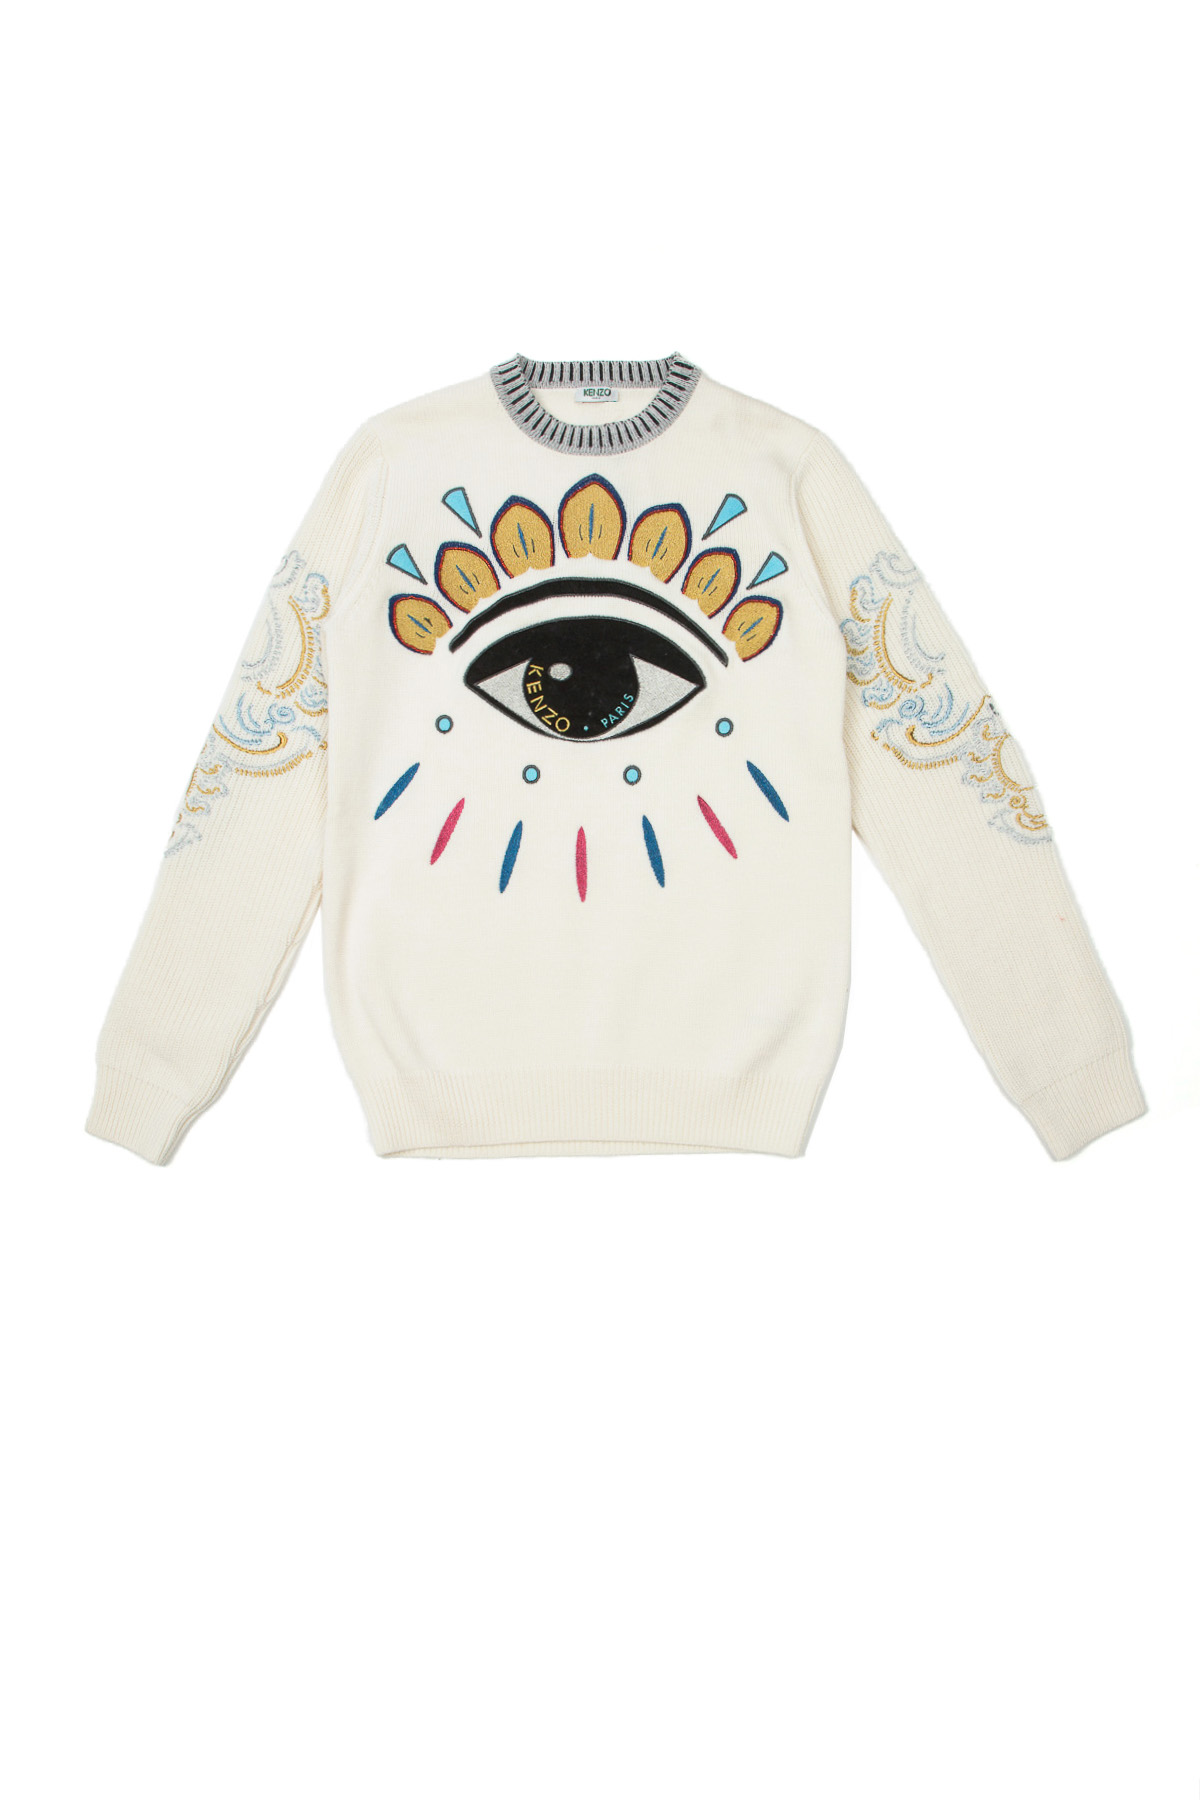 STYLE: The All Seeing Eye